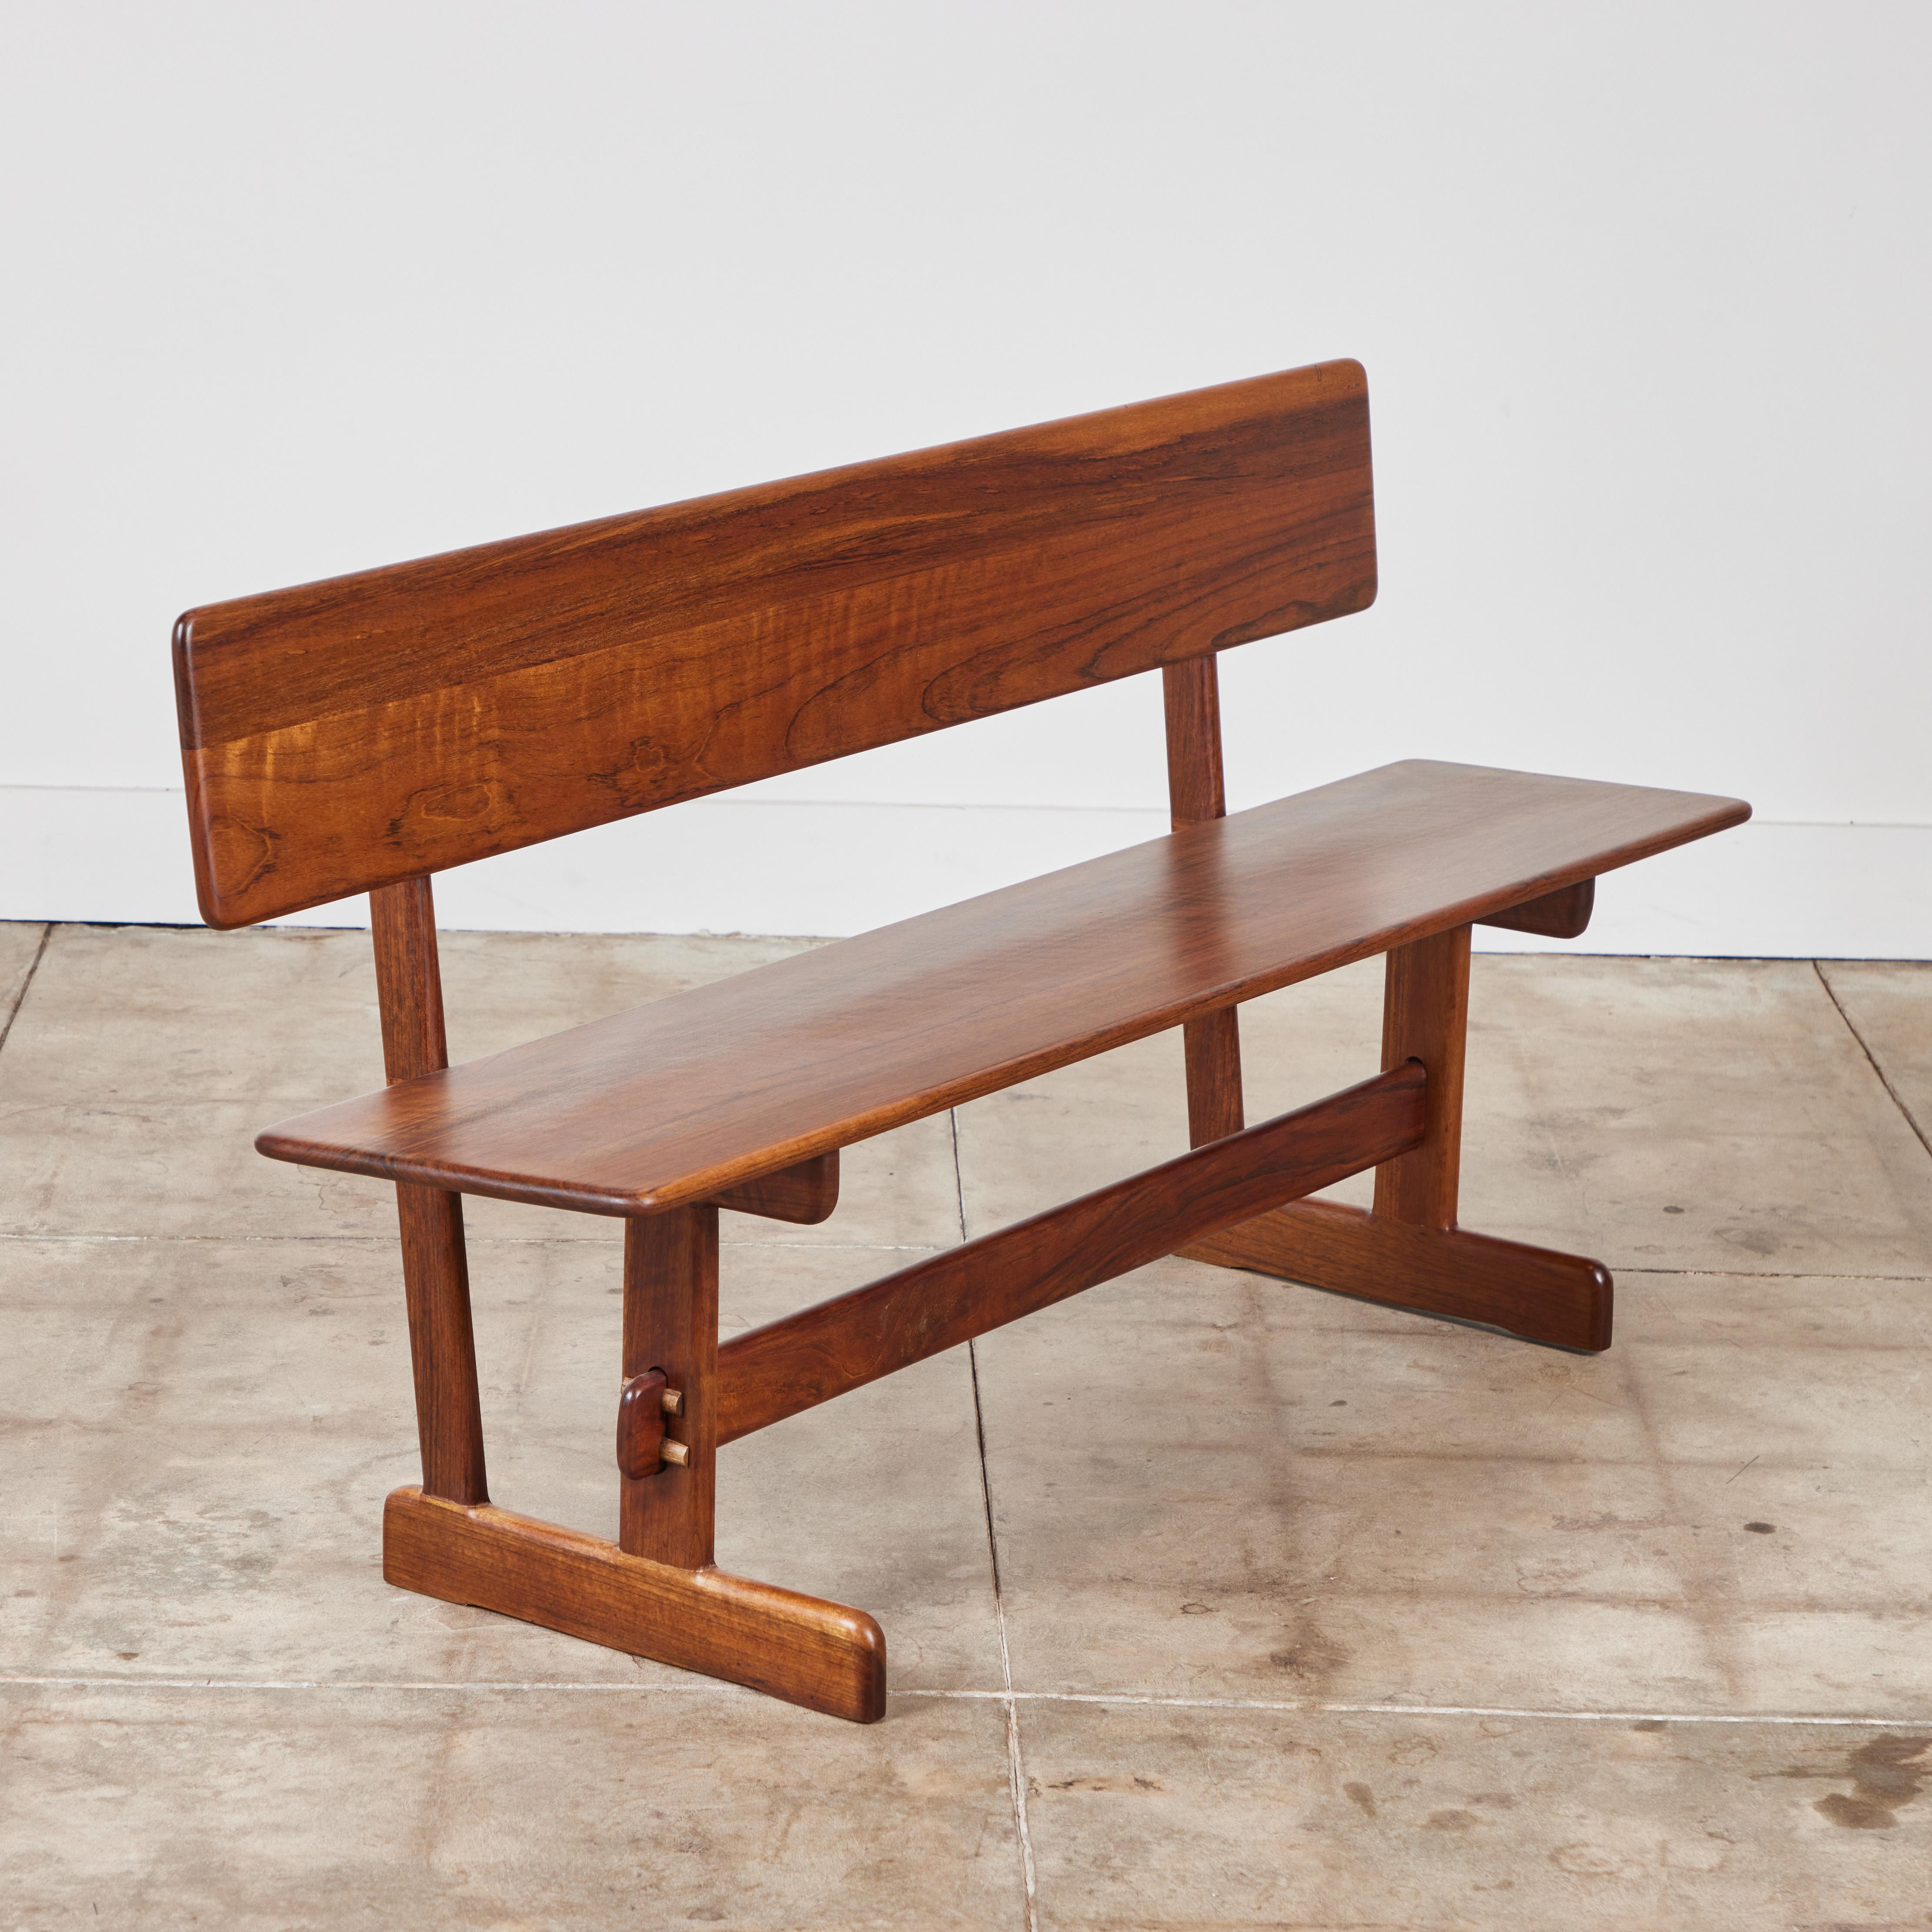 Shedua wood bench from American designer Gerald McCabe for Eon Furniture, c.1970s. The solid wood bench has a long seat with seat back perfect for a dining table or entry way.
Two available.

Dimensions
60